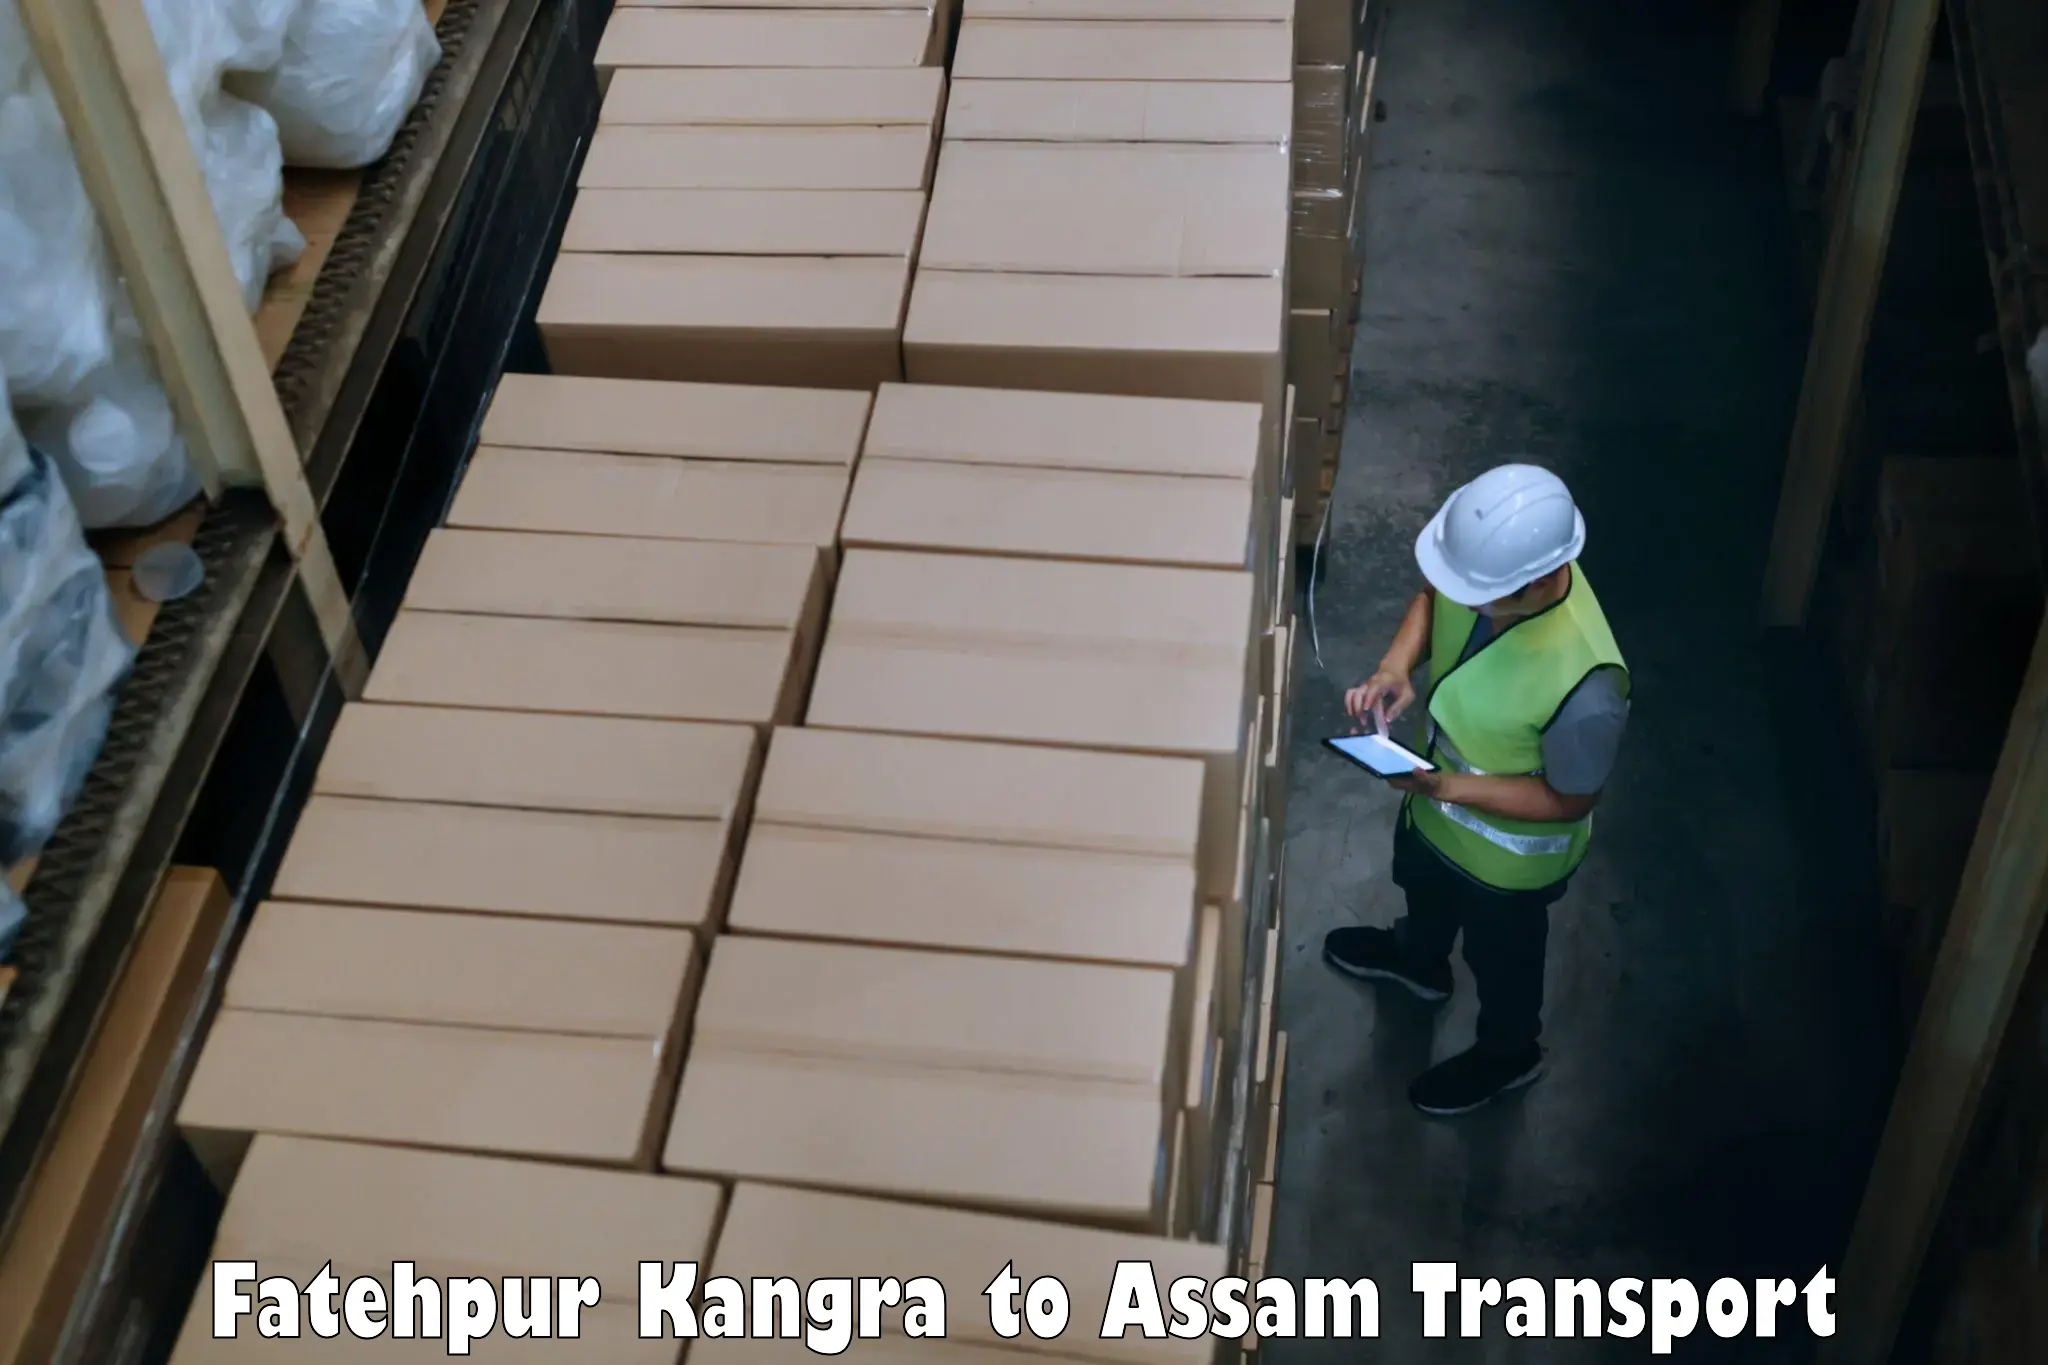 Road transport services in Fatehpur Kangra to Assam